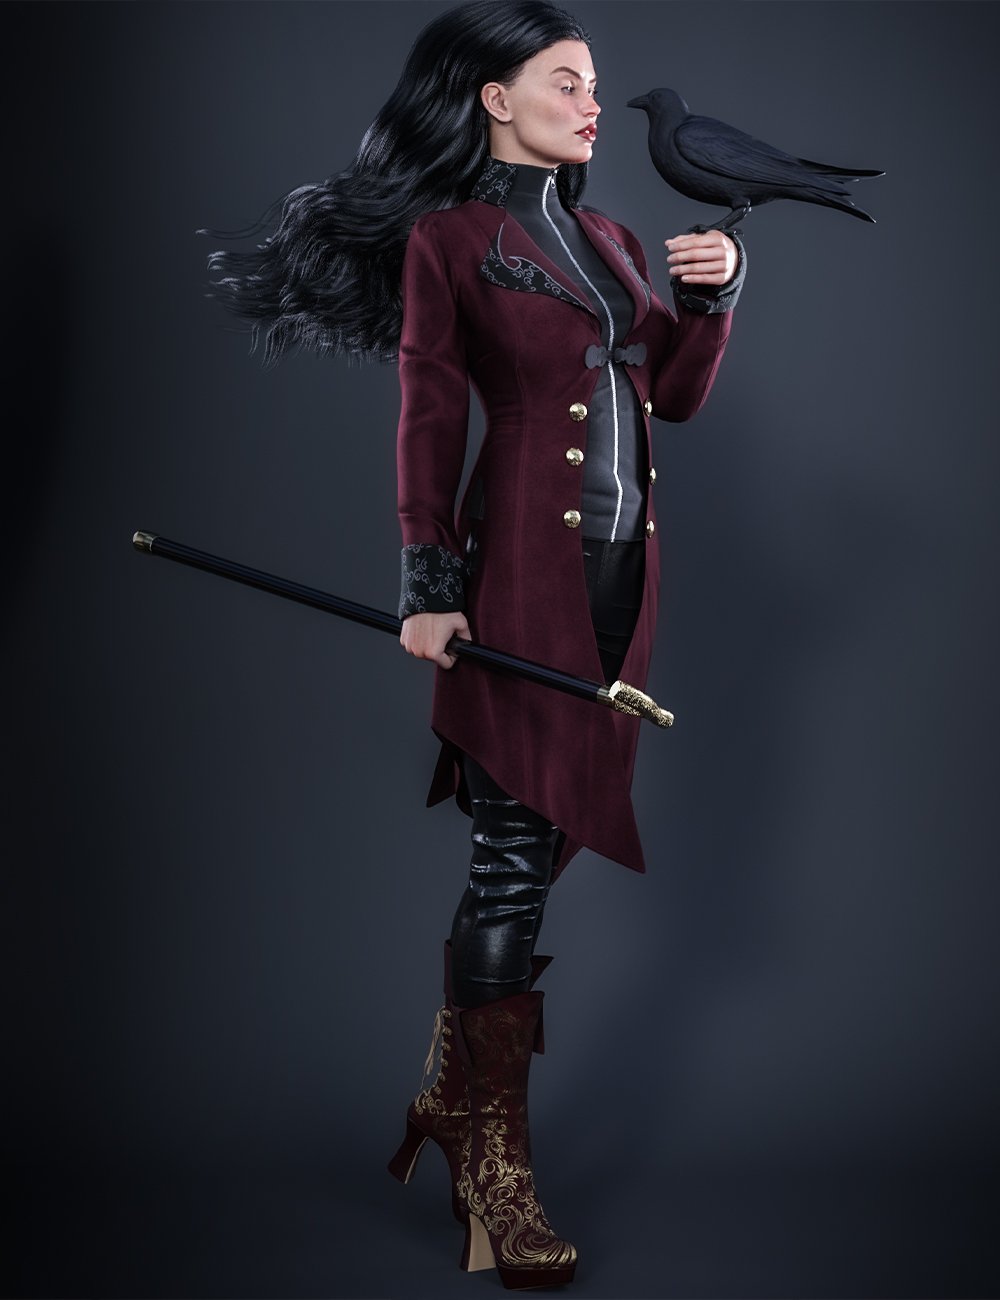 dForce Victorian Vampire Outfit for Genesis 8 and 8.1 Females by: fefecoolyellow, 3D Models by Daz 3D